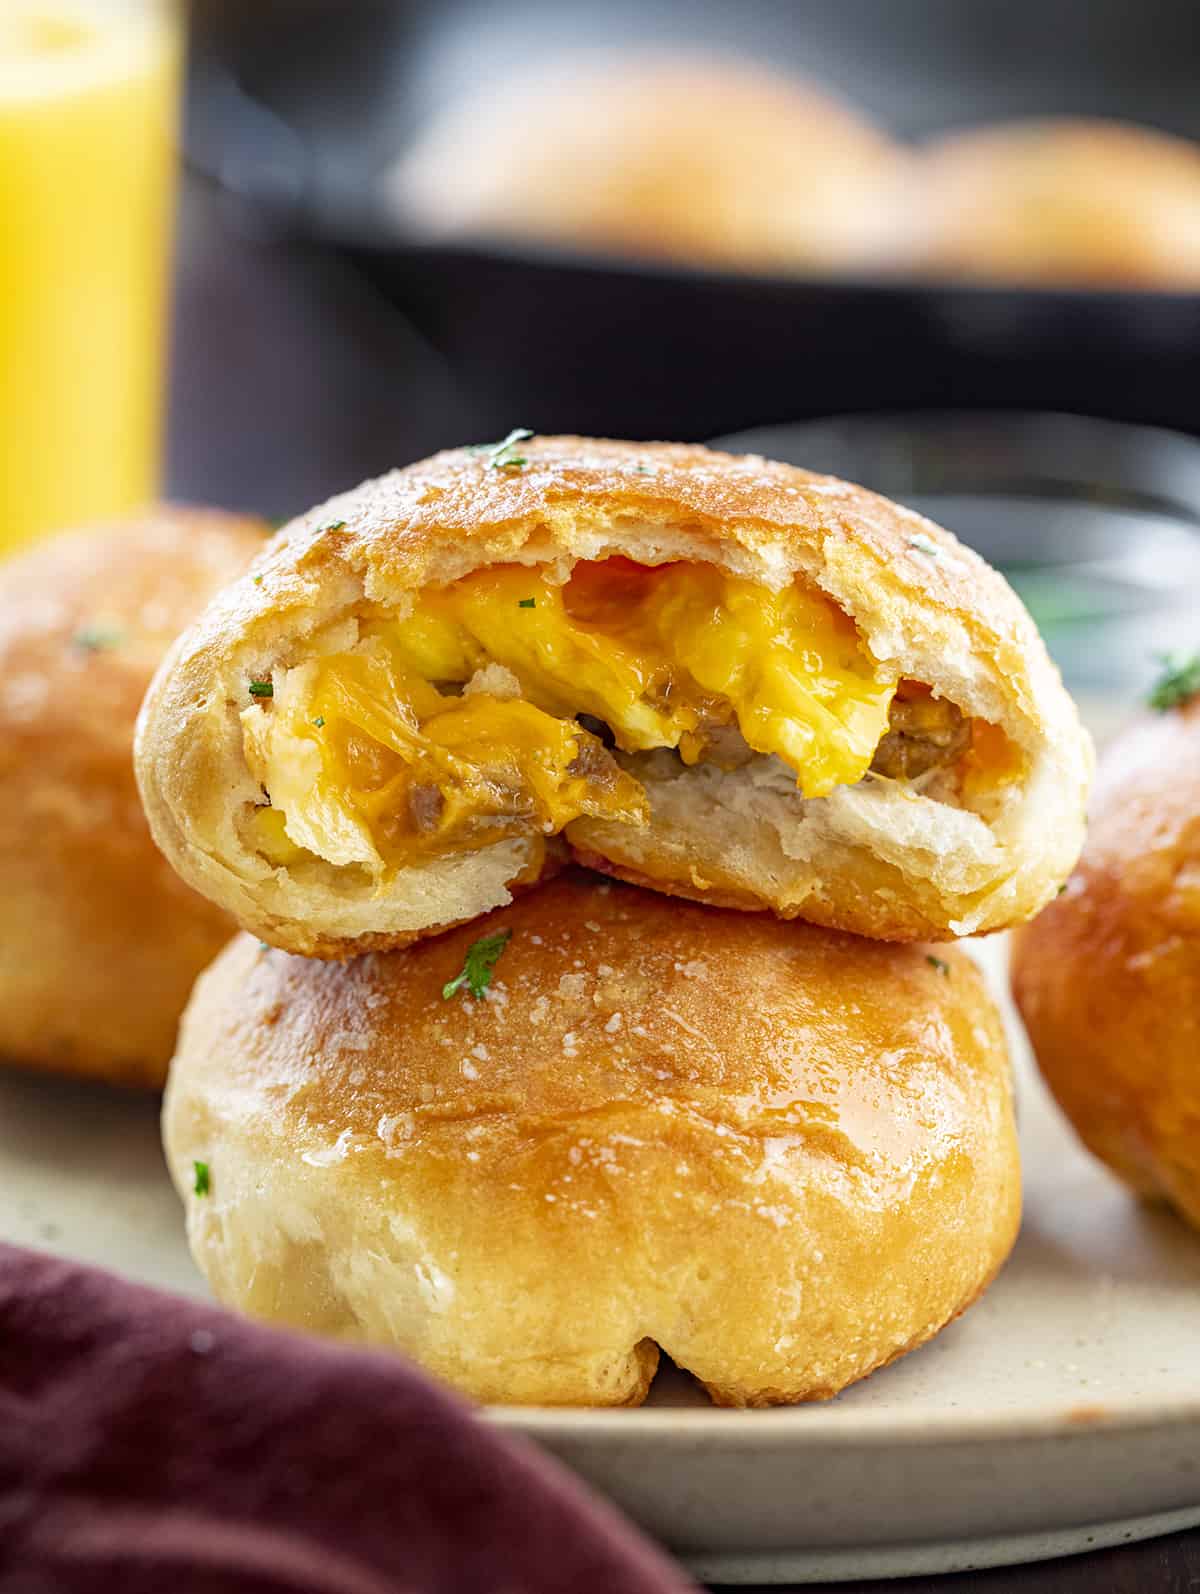 Stacked Breakfast Bombs Showing Inside with Cheesy and Eggs. Breakfast, Easy Breakfast, Kid Breakfast, Breakfast Ideas, Sausage and Egg Breakfast, Sausage Egg Cheese Breakfast, Hot Breakfast, Brunch, Brunch IDeas, brunch recipes, i am homesteader, iamhomesteader